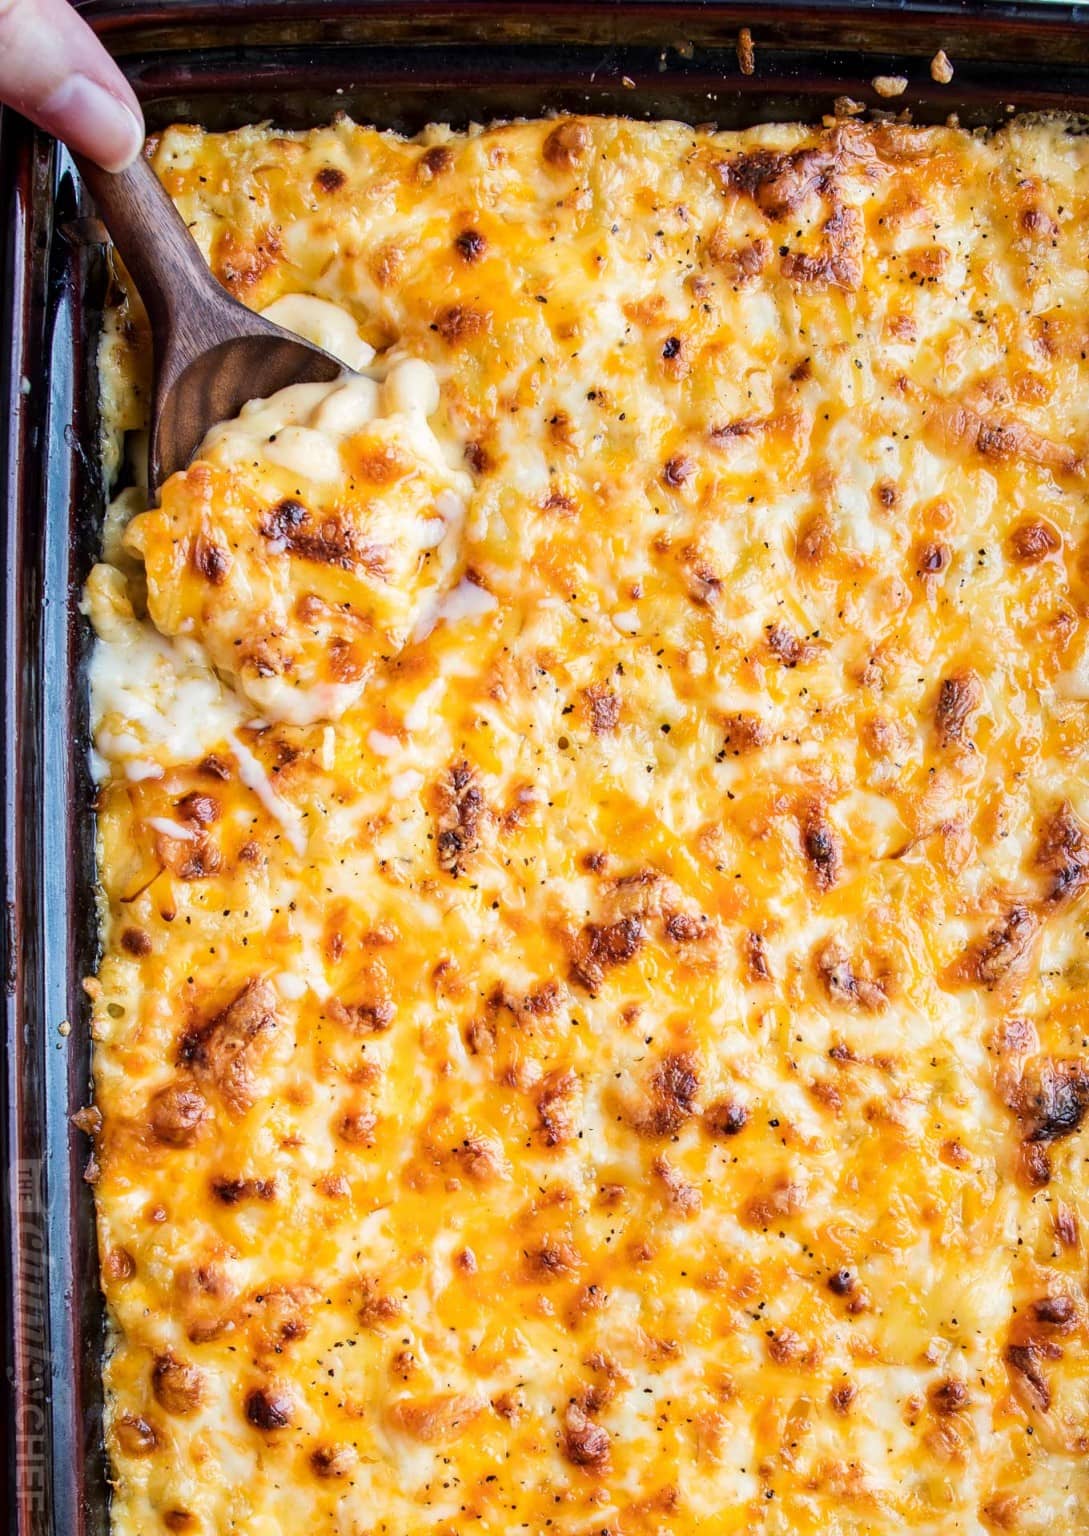 A baking dish full of macaroni and cheese shot from above, you can see the baked cheese layer on top.